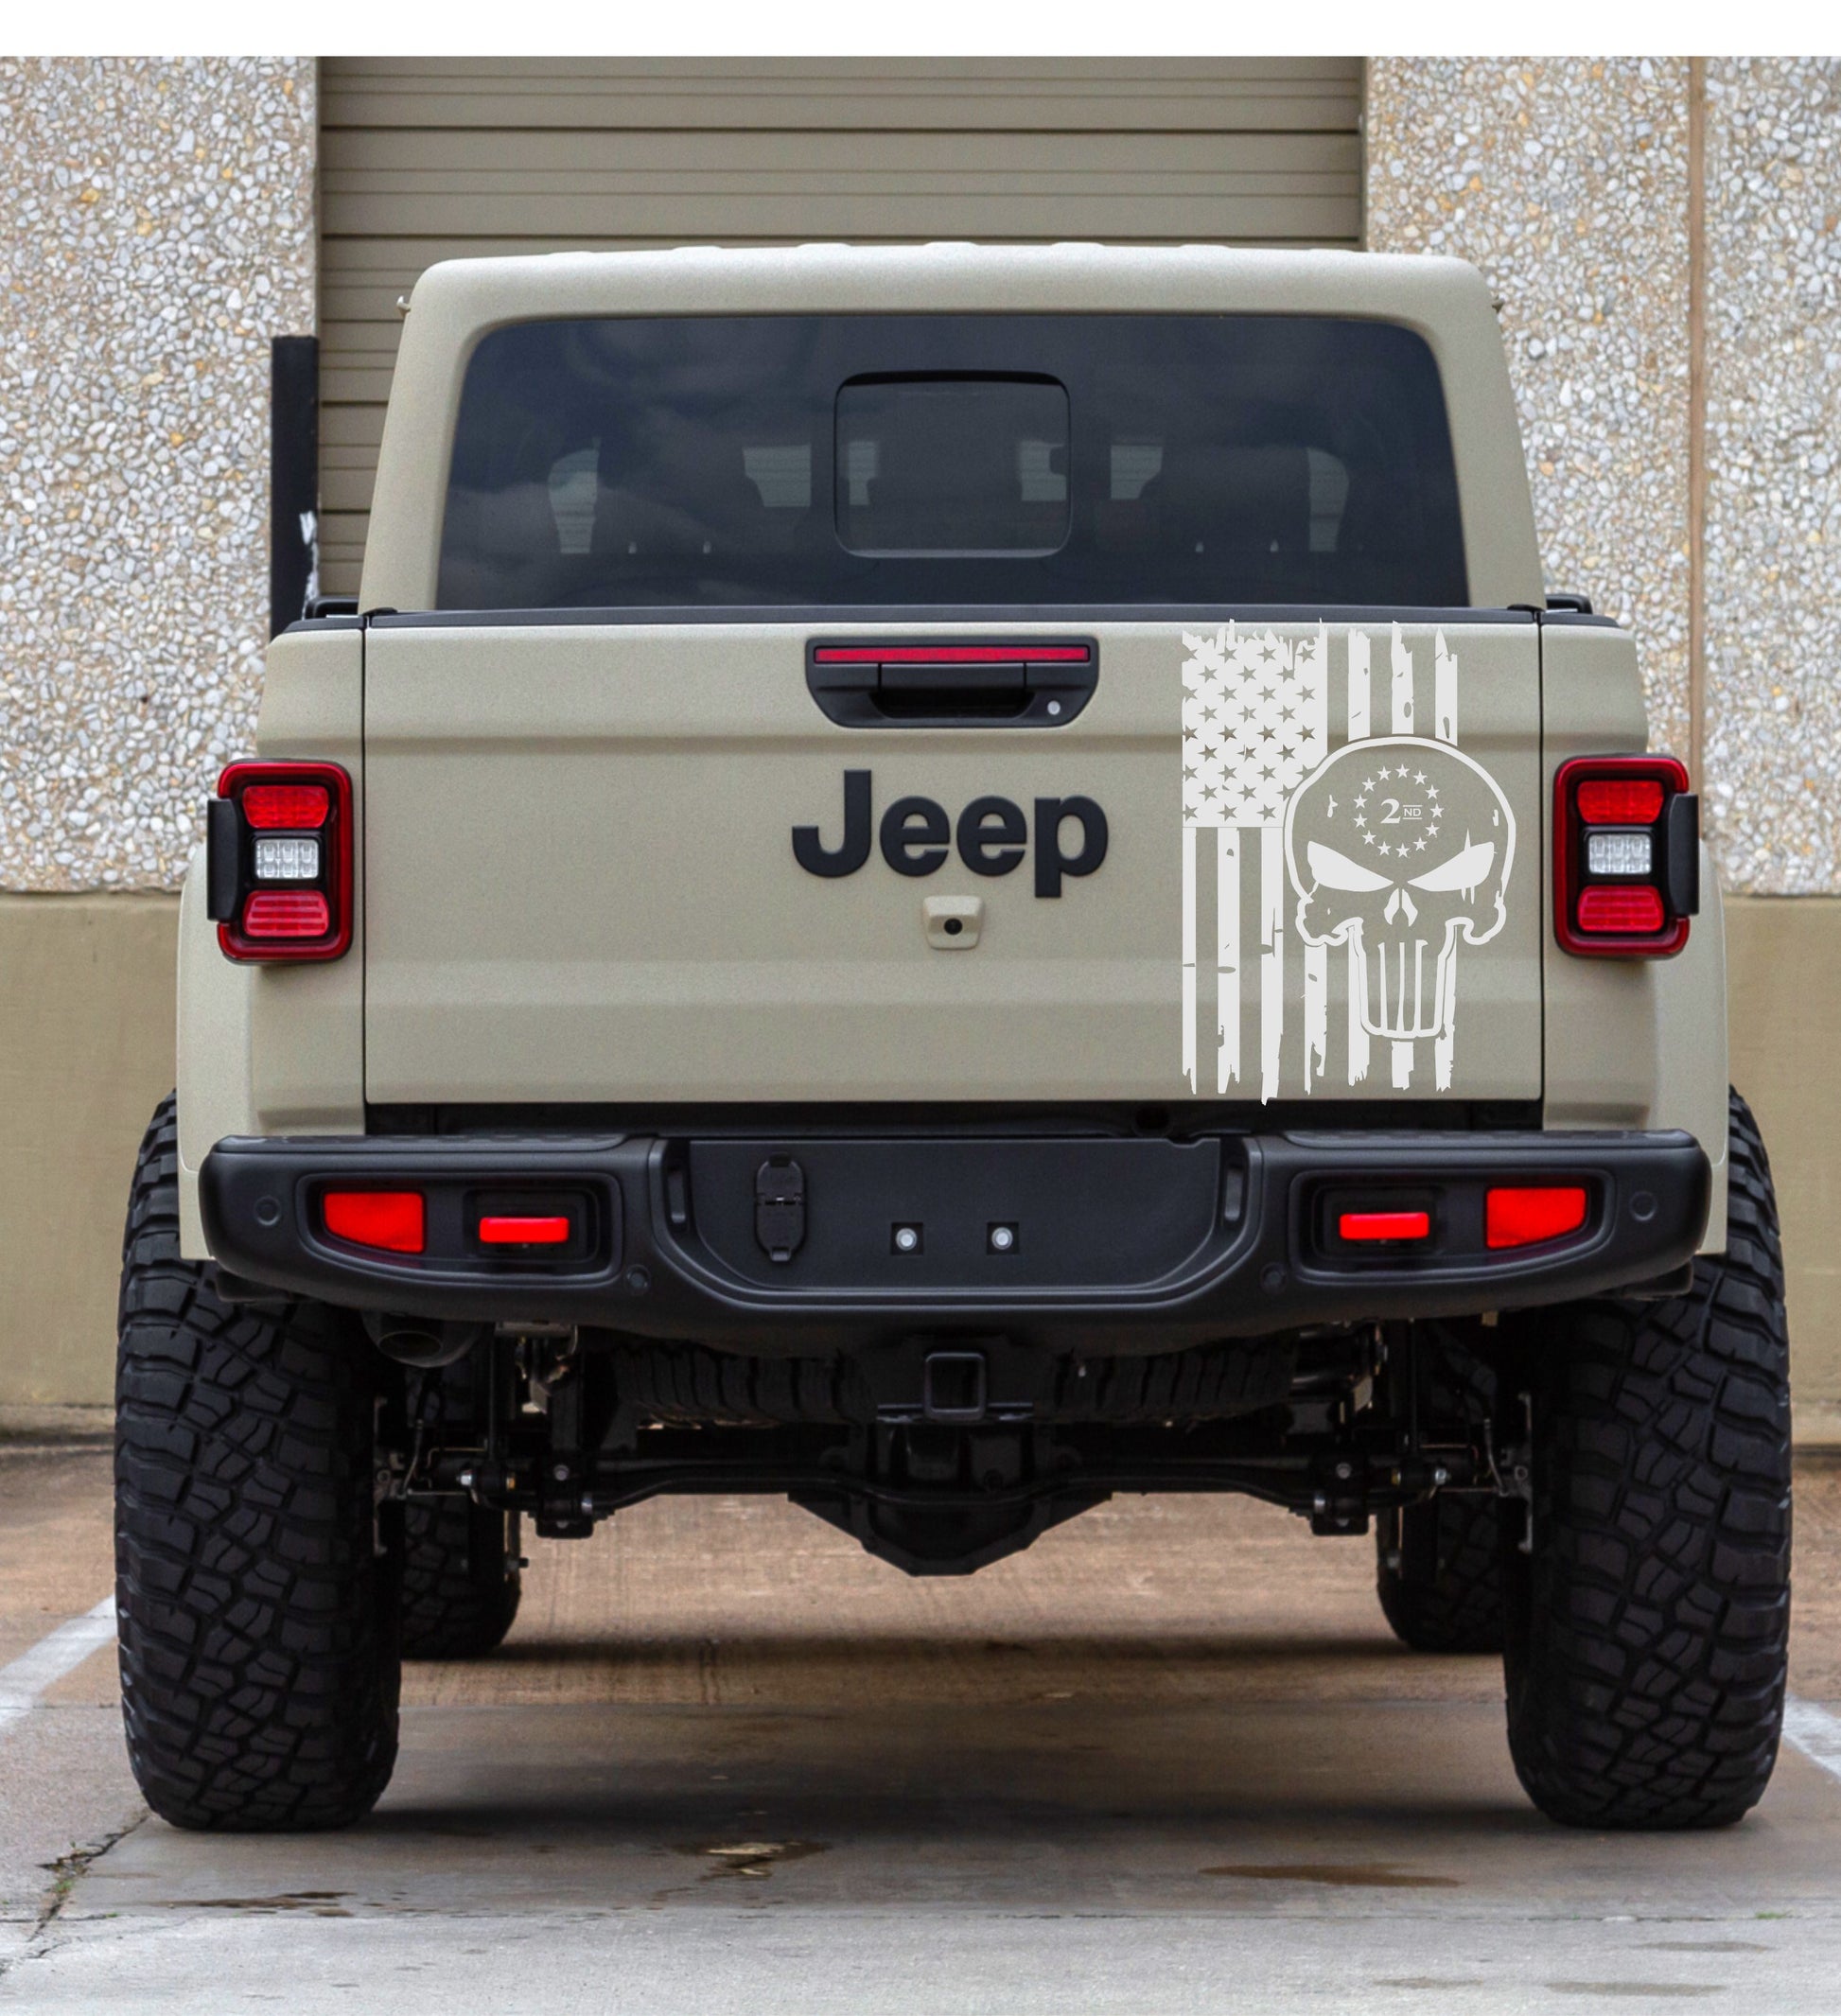 American Flag Punisher 2nd Amendment Decal for Jeep Gladiator Tailgate/Trucks/Cars.  Sizes Available.